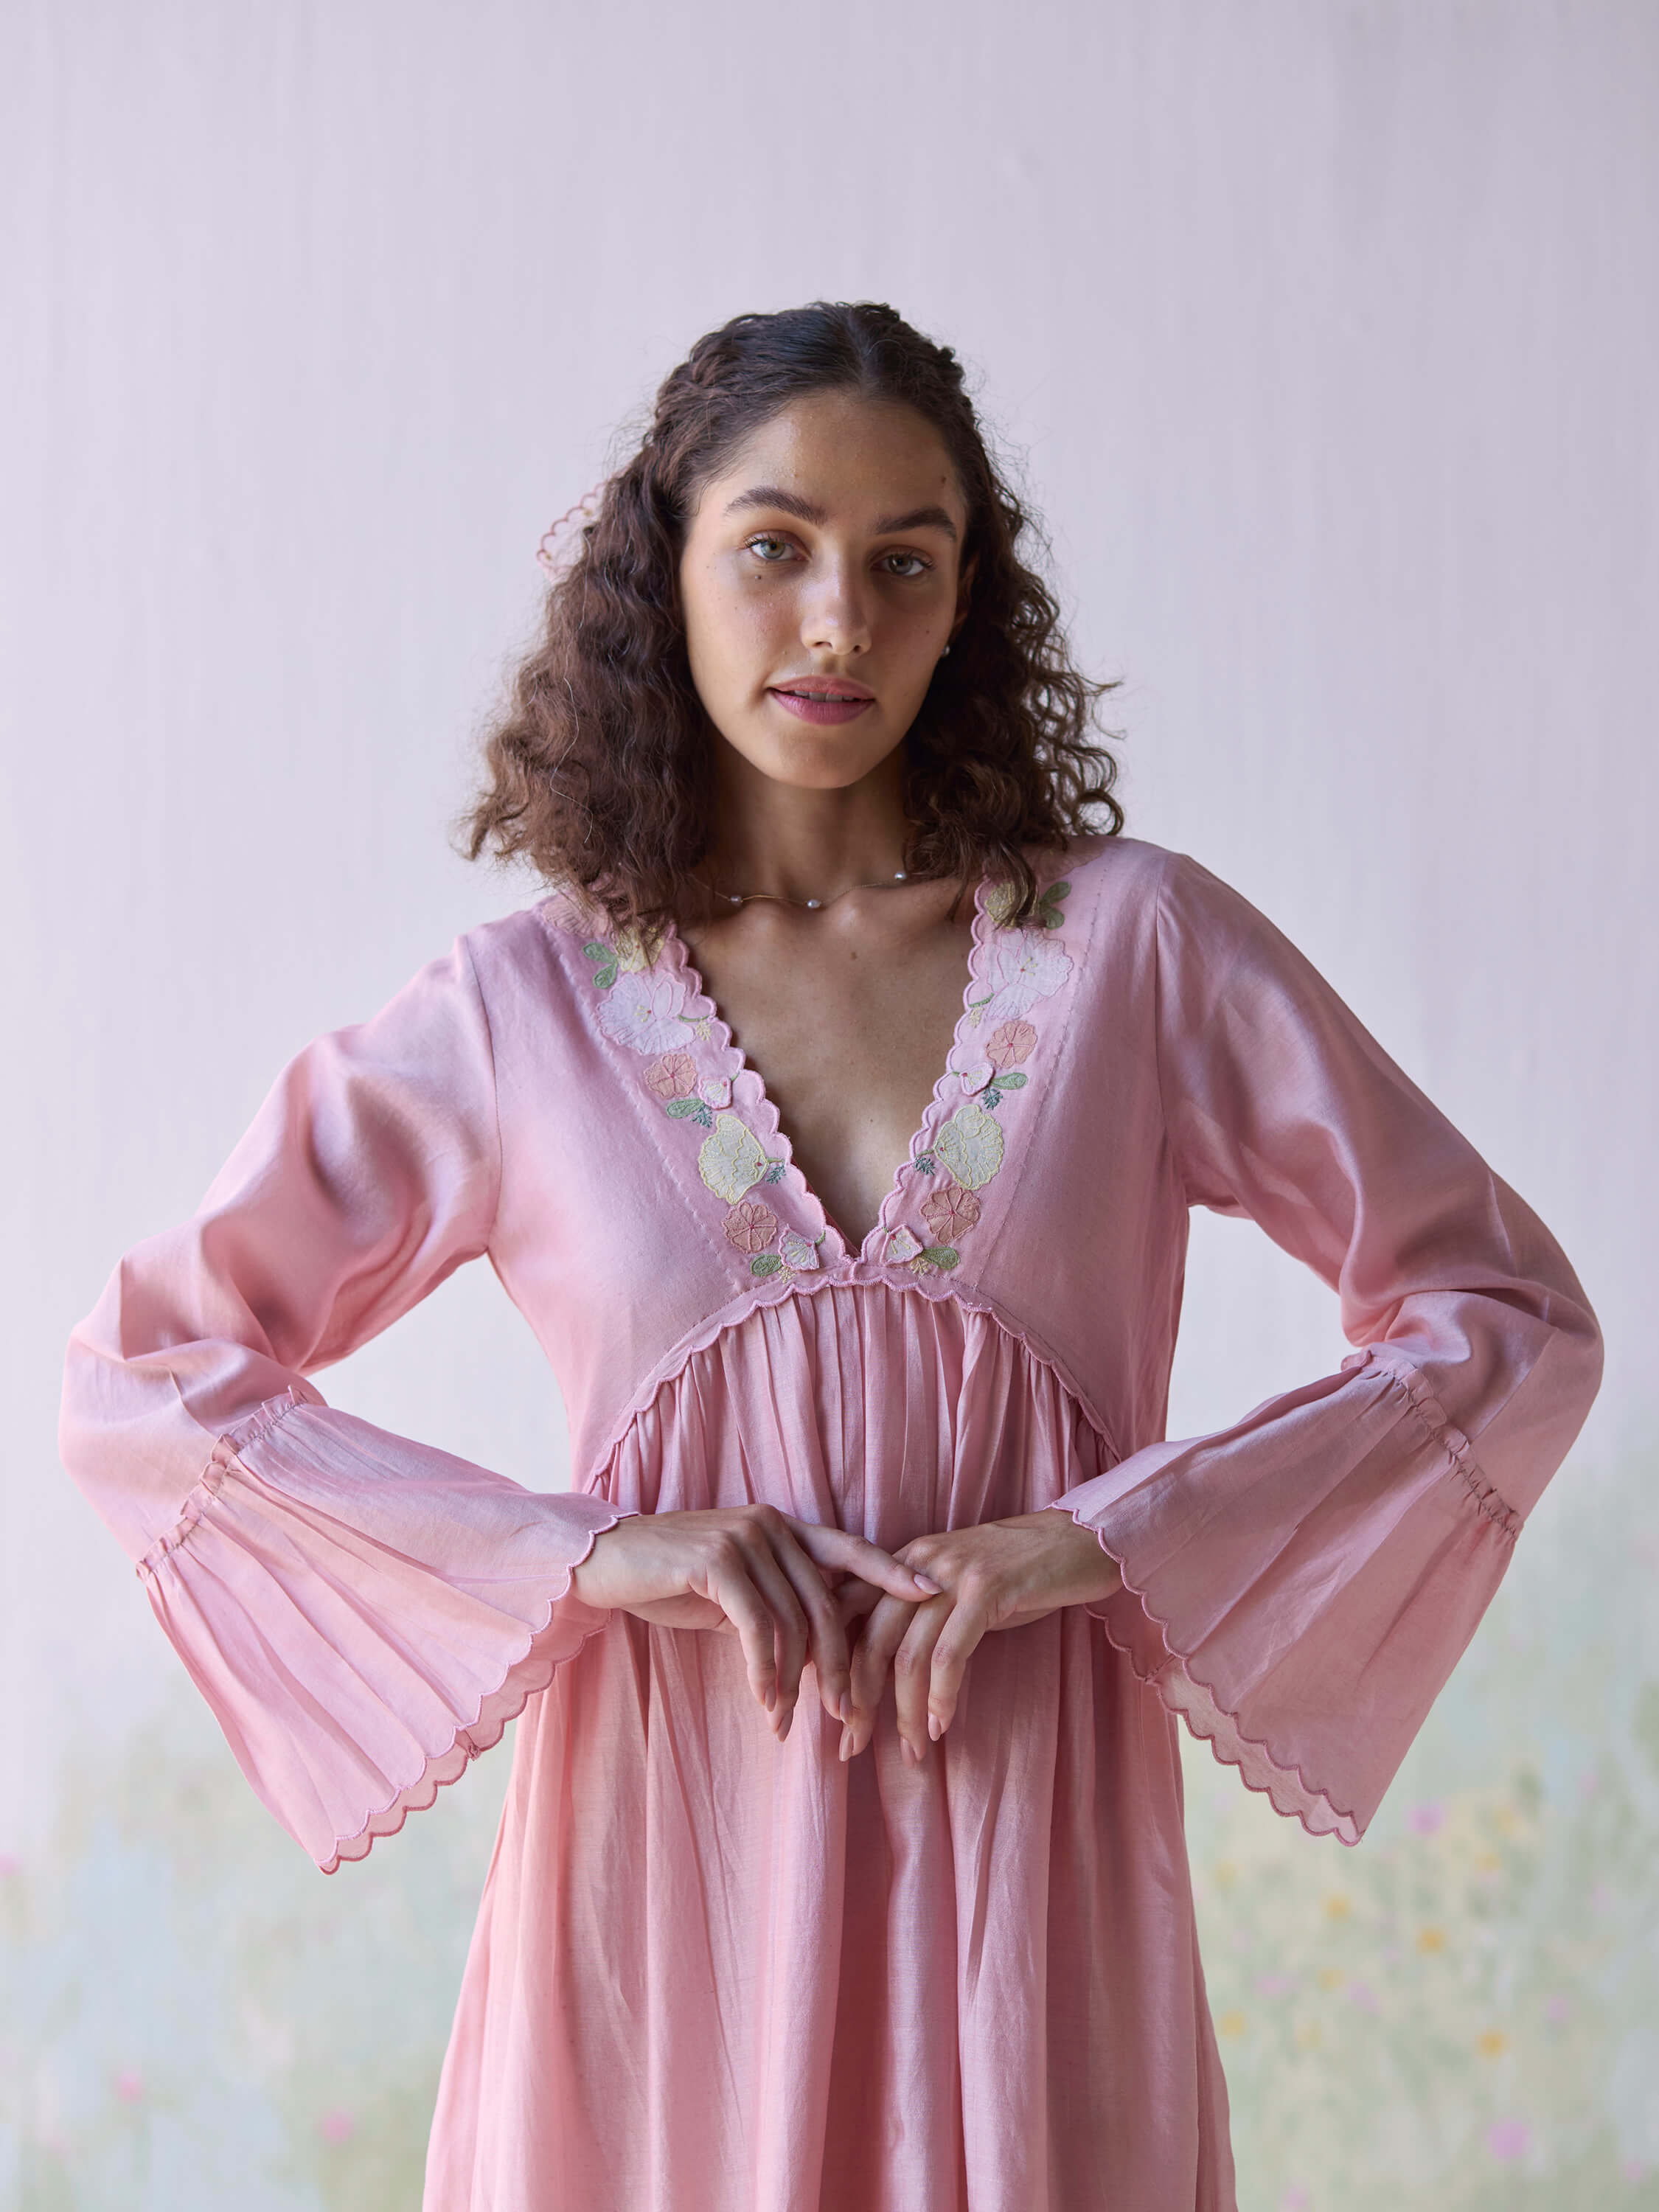 Woman in elegant pink dress with floral embroidery and flared sleeves.